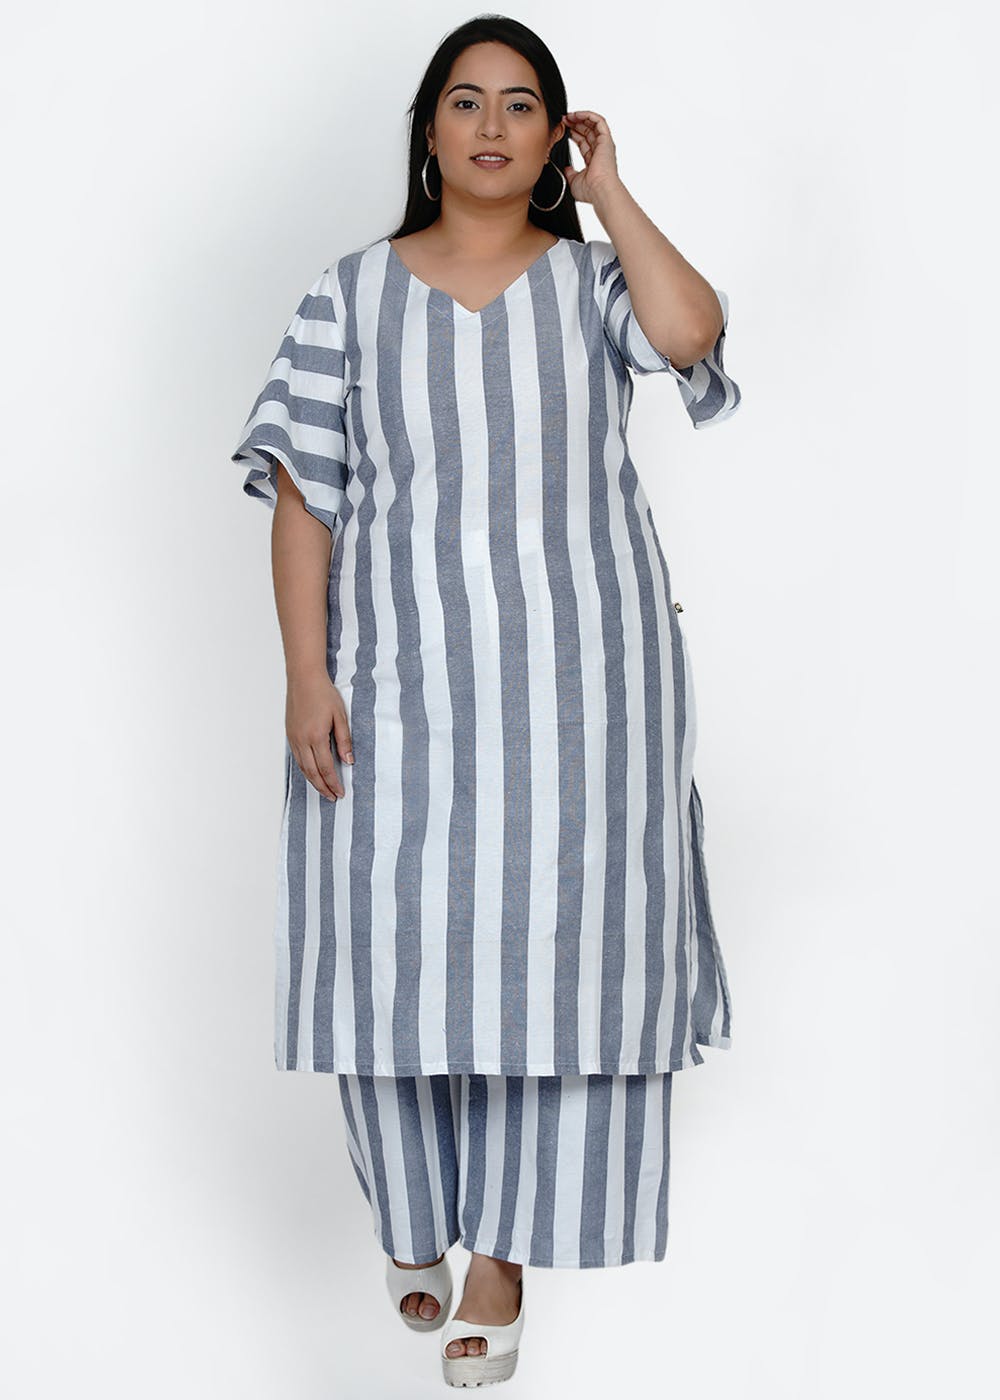 Get Handloom Cotton White And Blue Stripe Kurta With Loose Fit ...